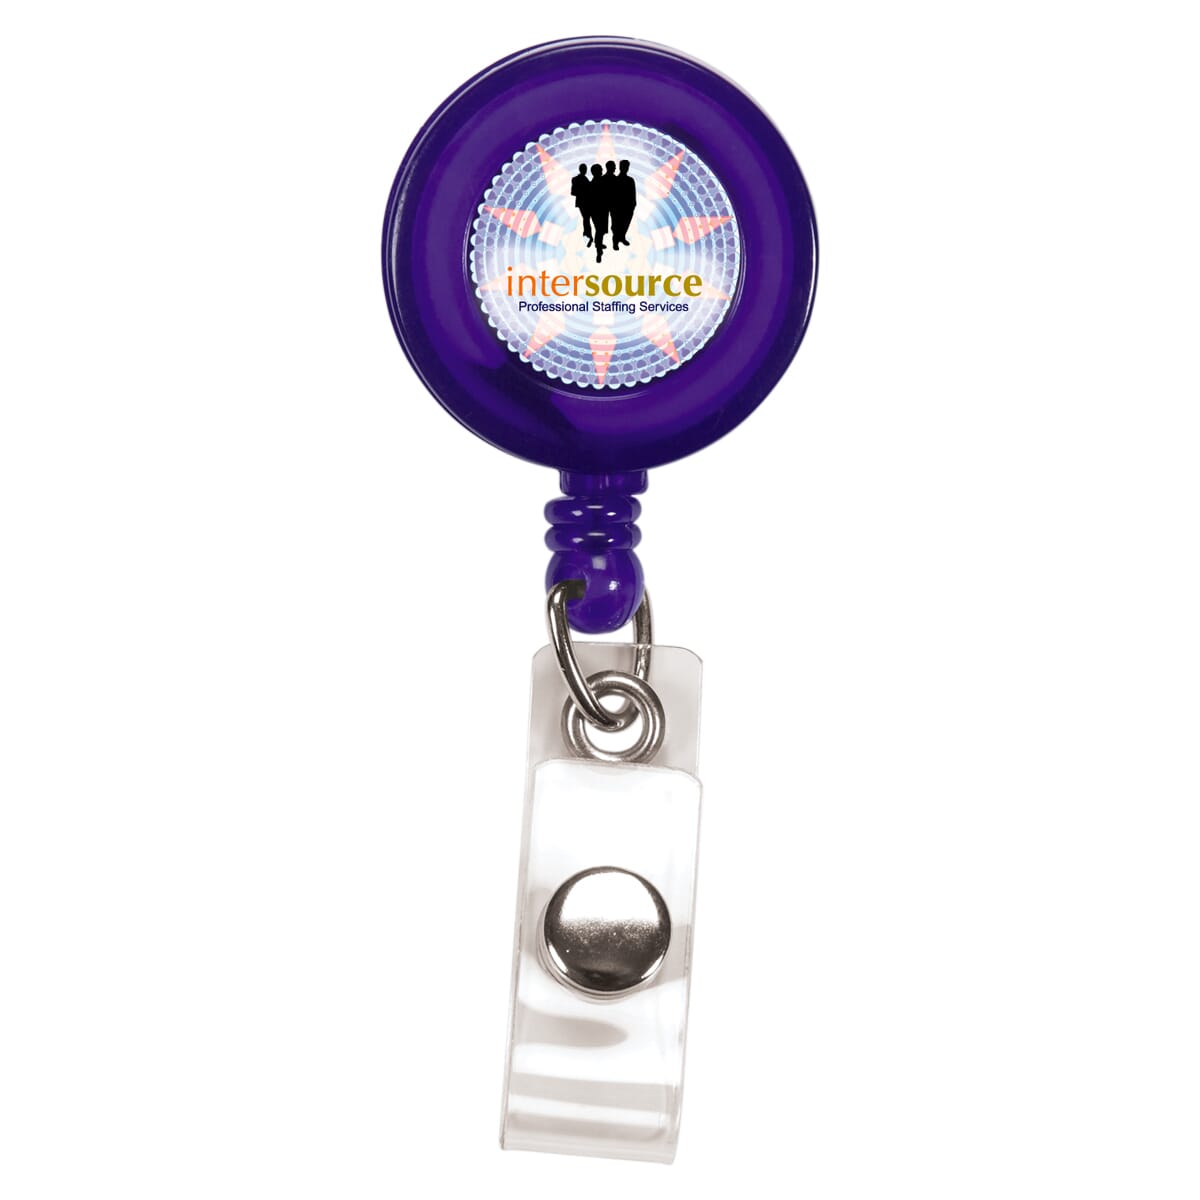 Quick draw badge holder with company logo